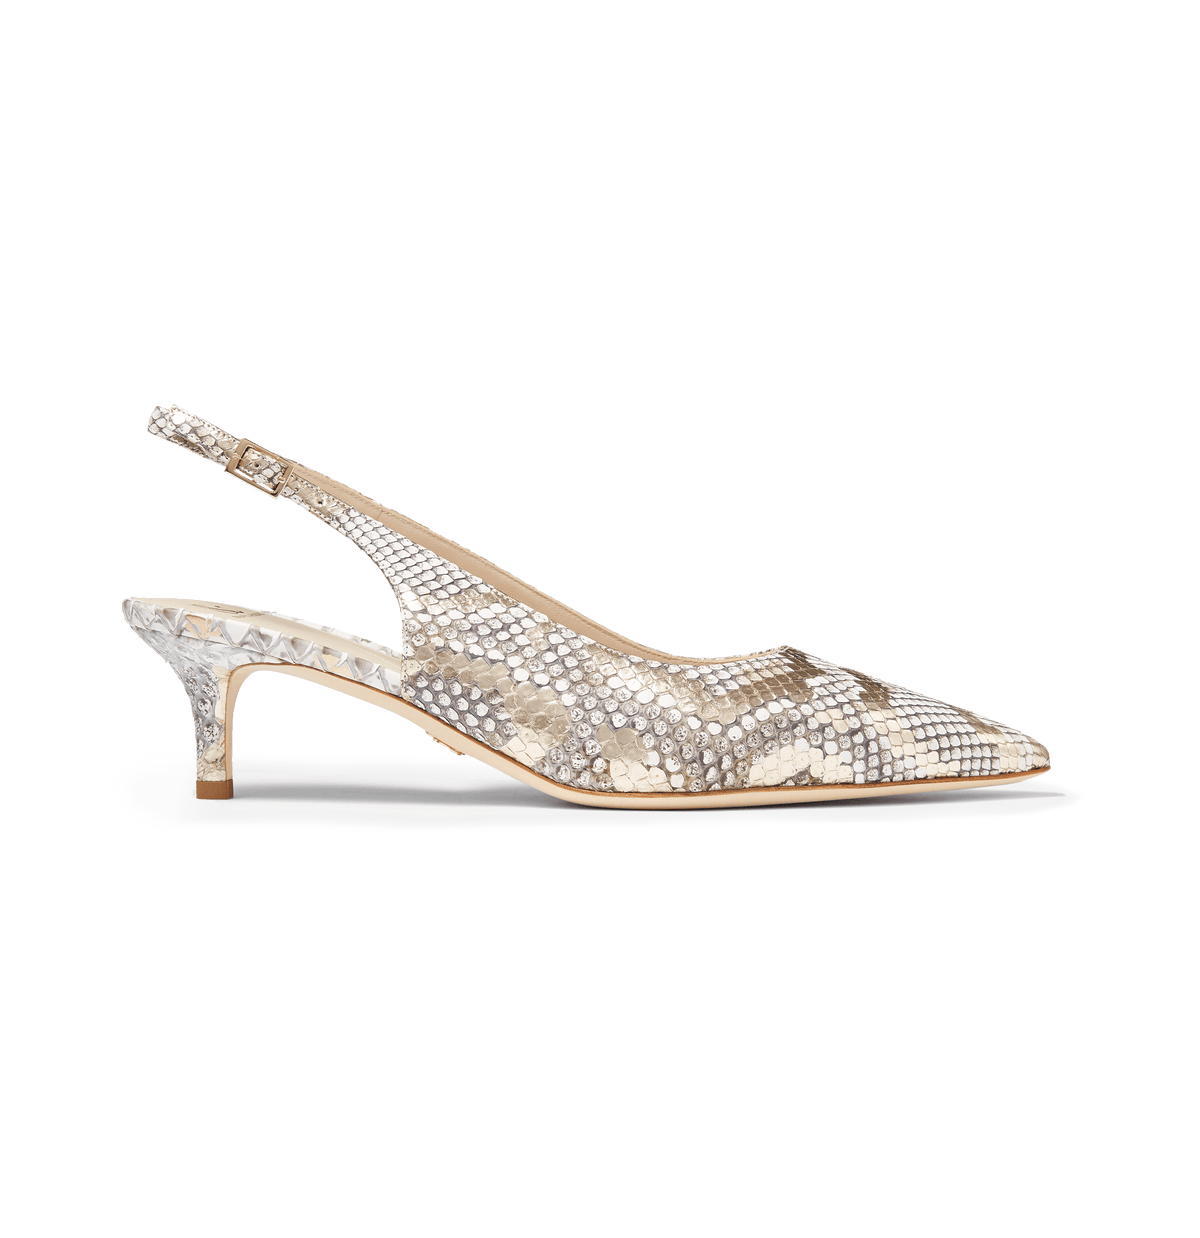 White and Gold Python Slingback Pumps